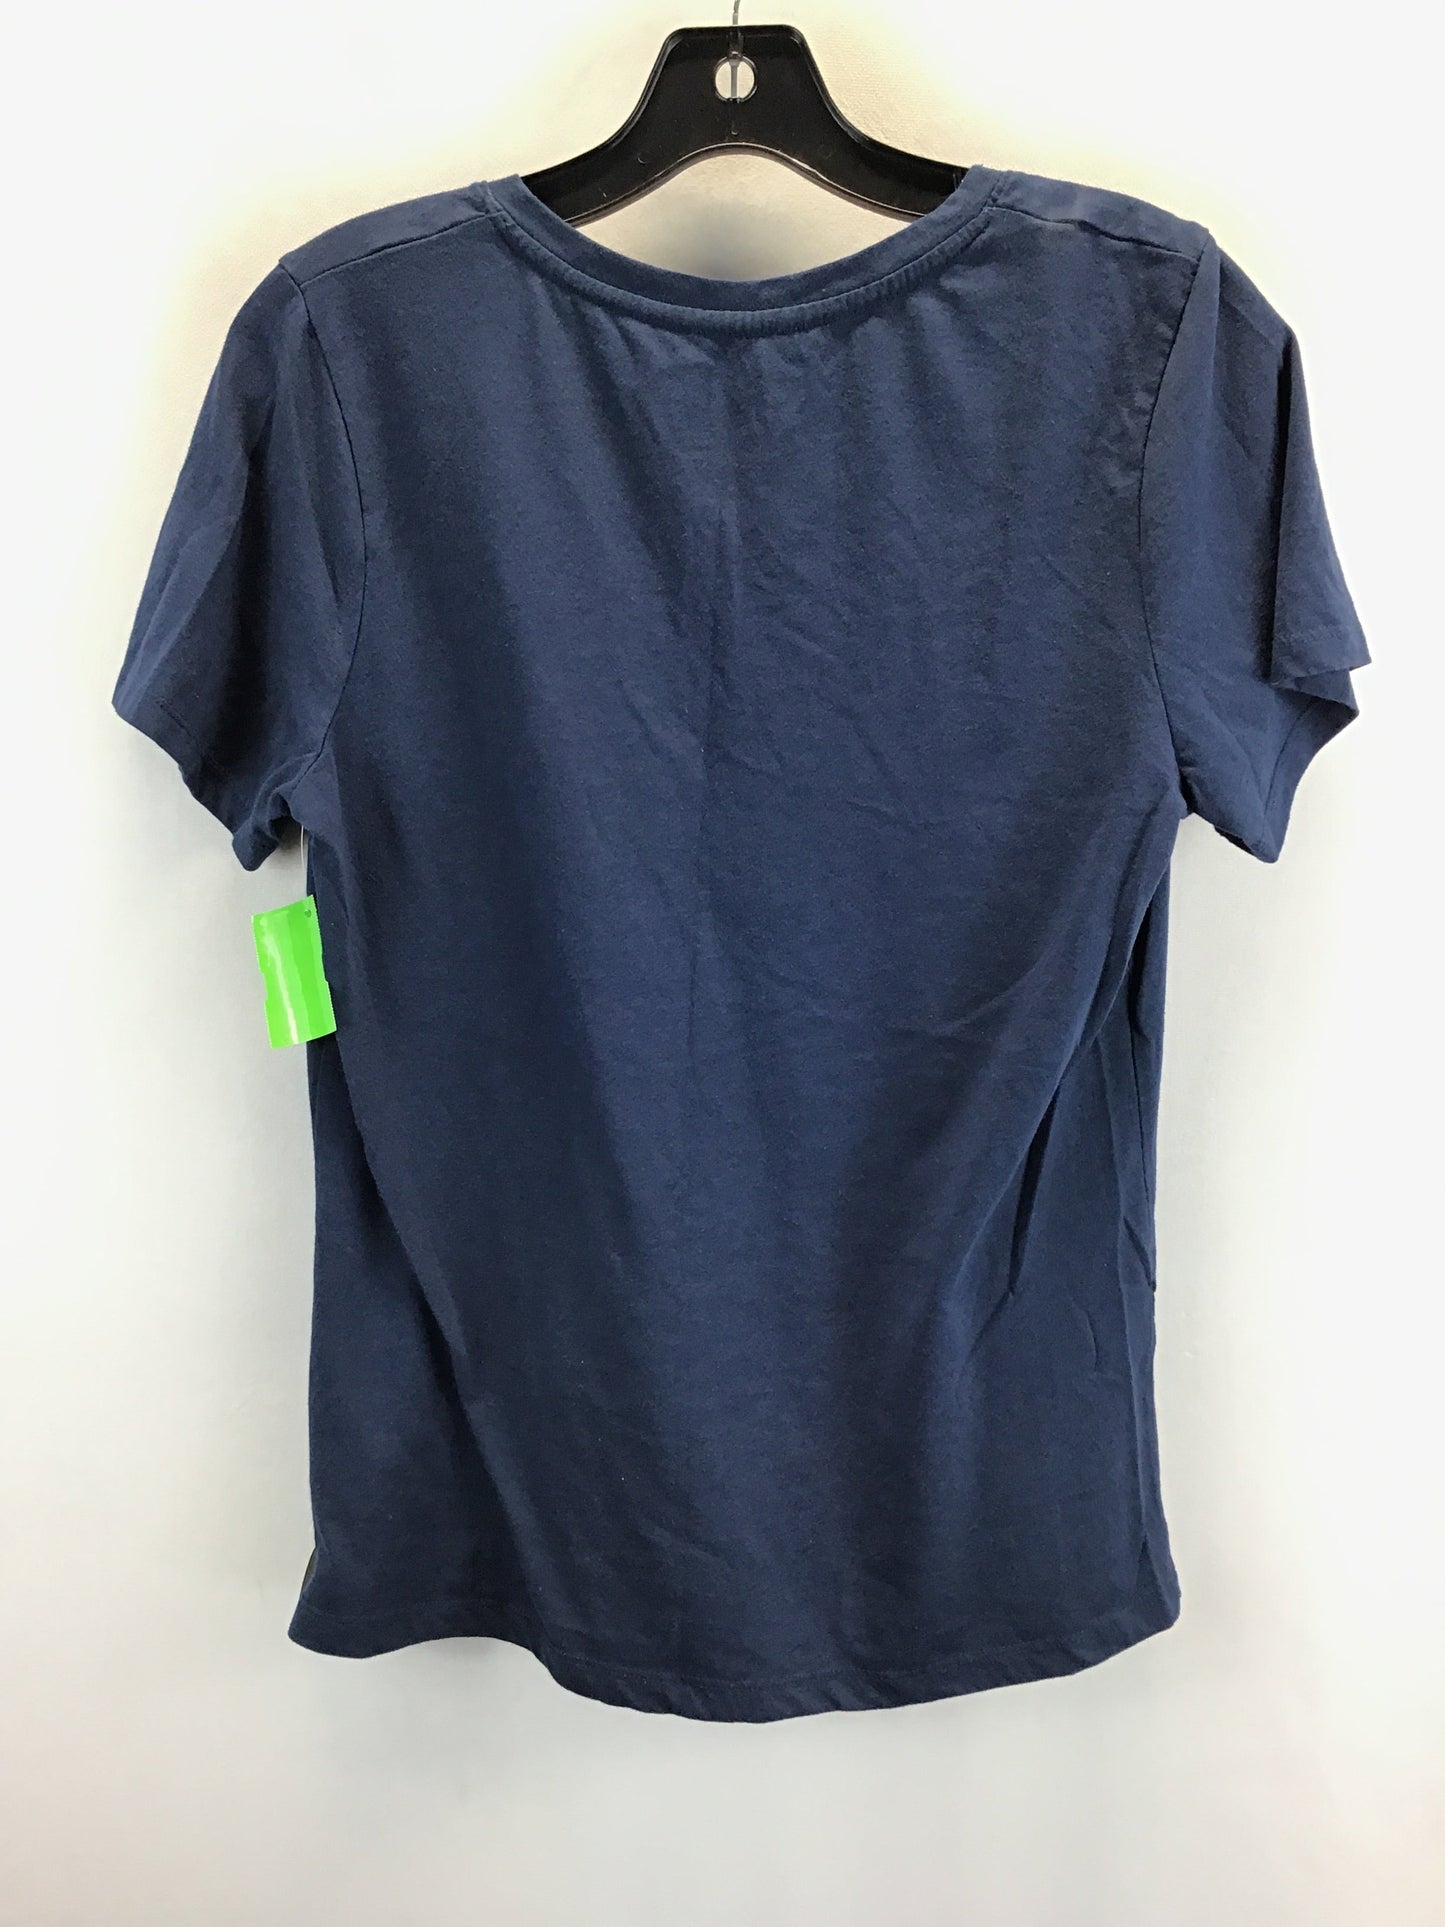 Blue Top Short Sleeve Time And Tru, Size M